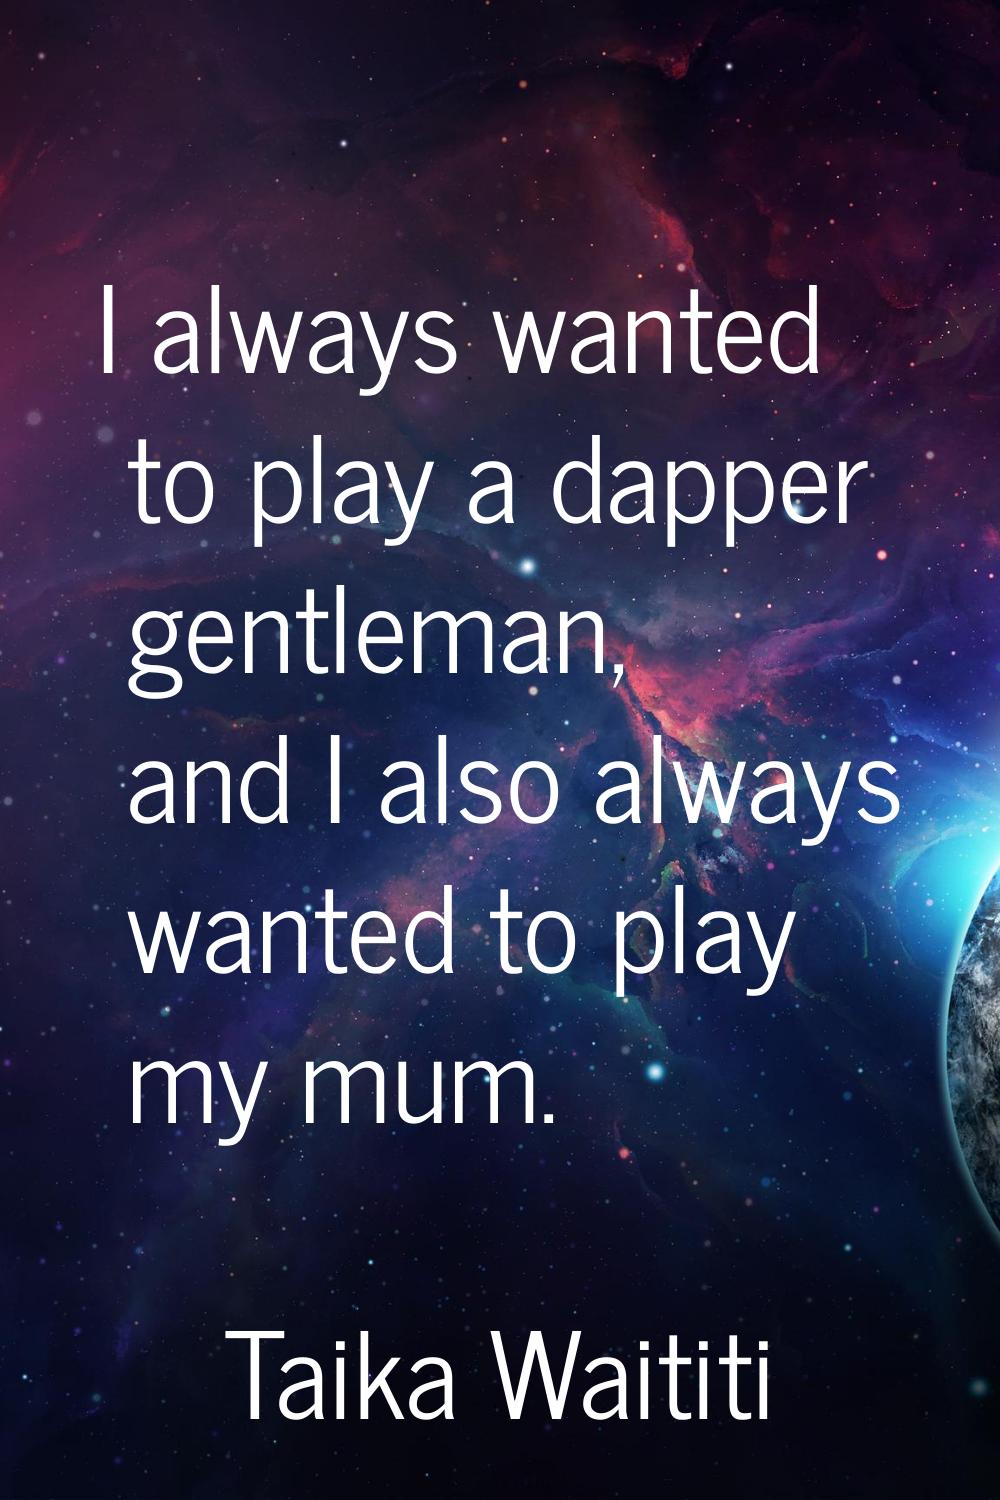 I always wanted to play a dapper gentleman, and I also always wanted to play my mum.